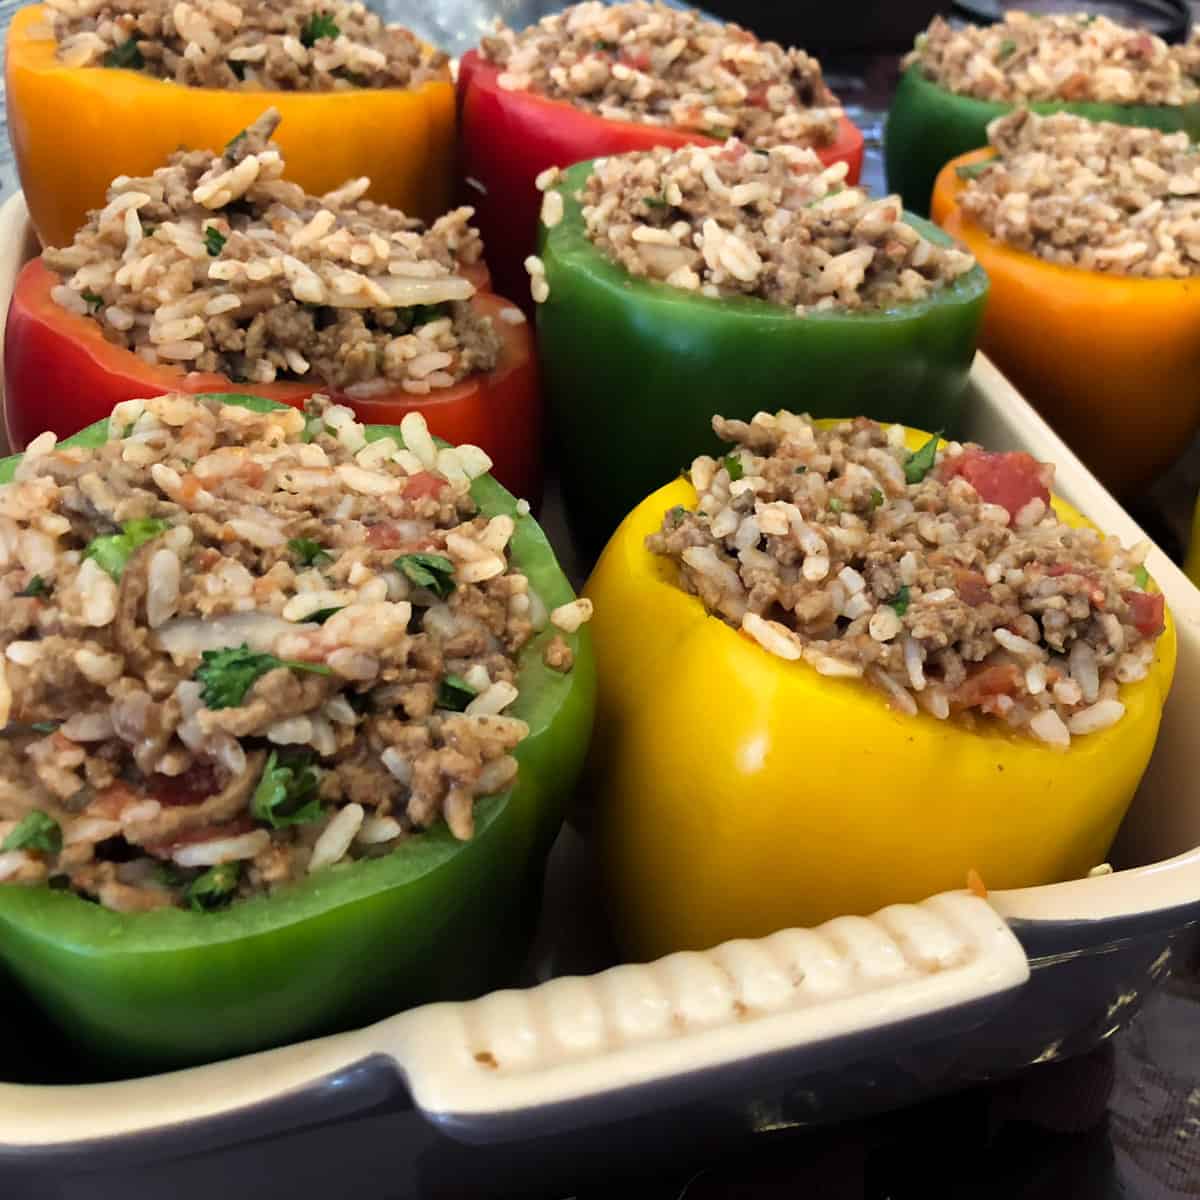 Raw peppers filled with cooked stuffing.